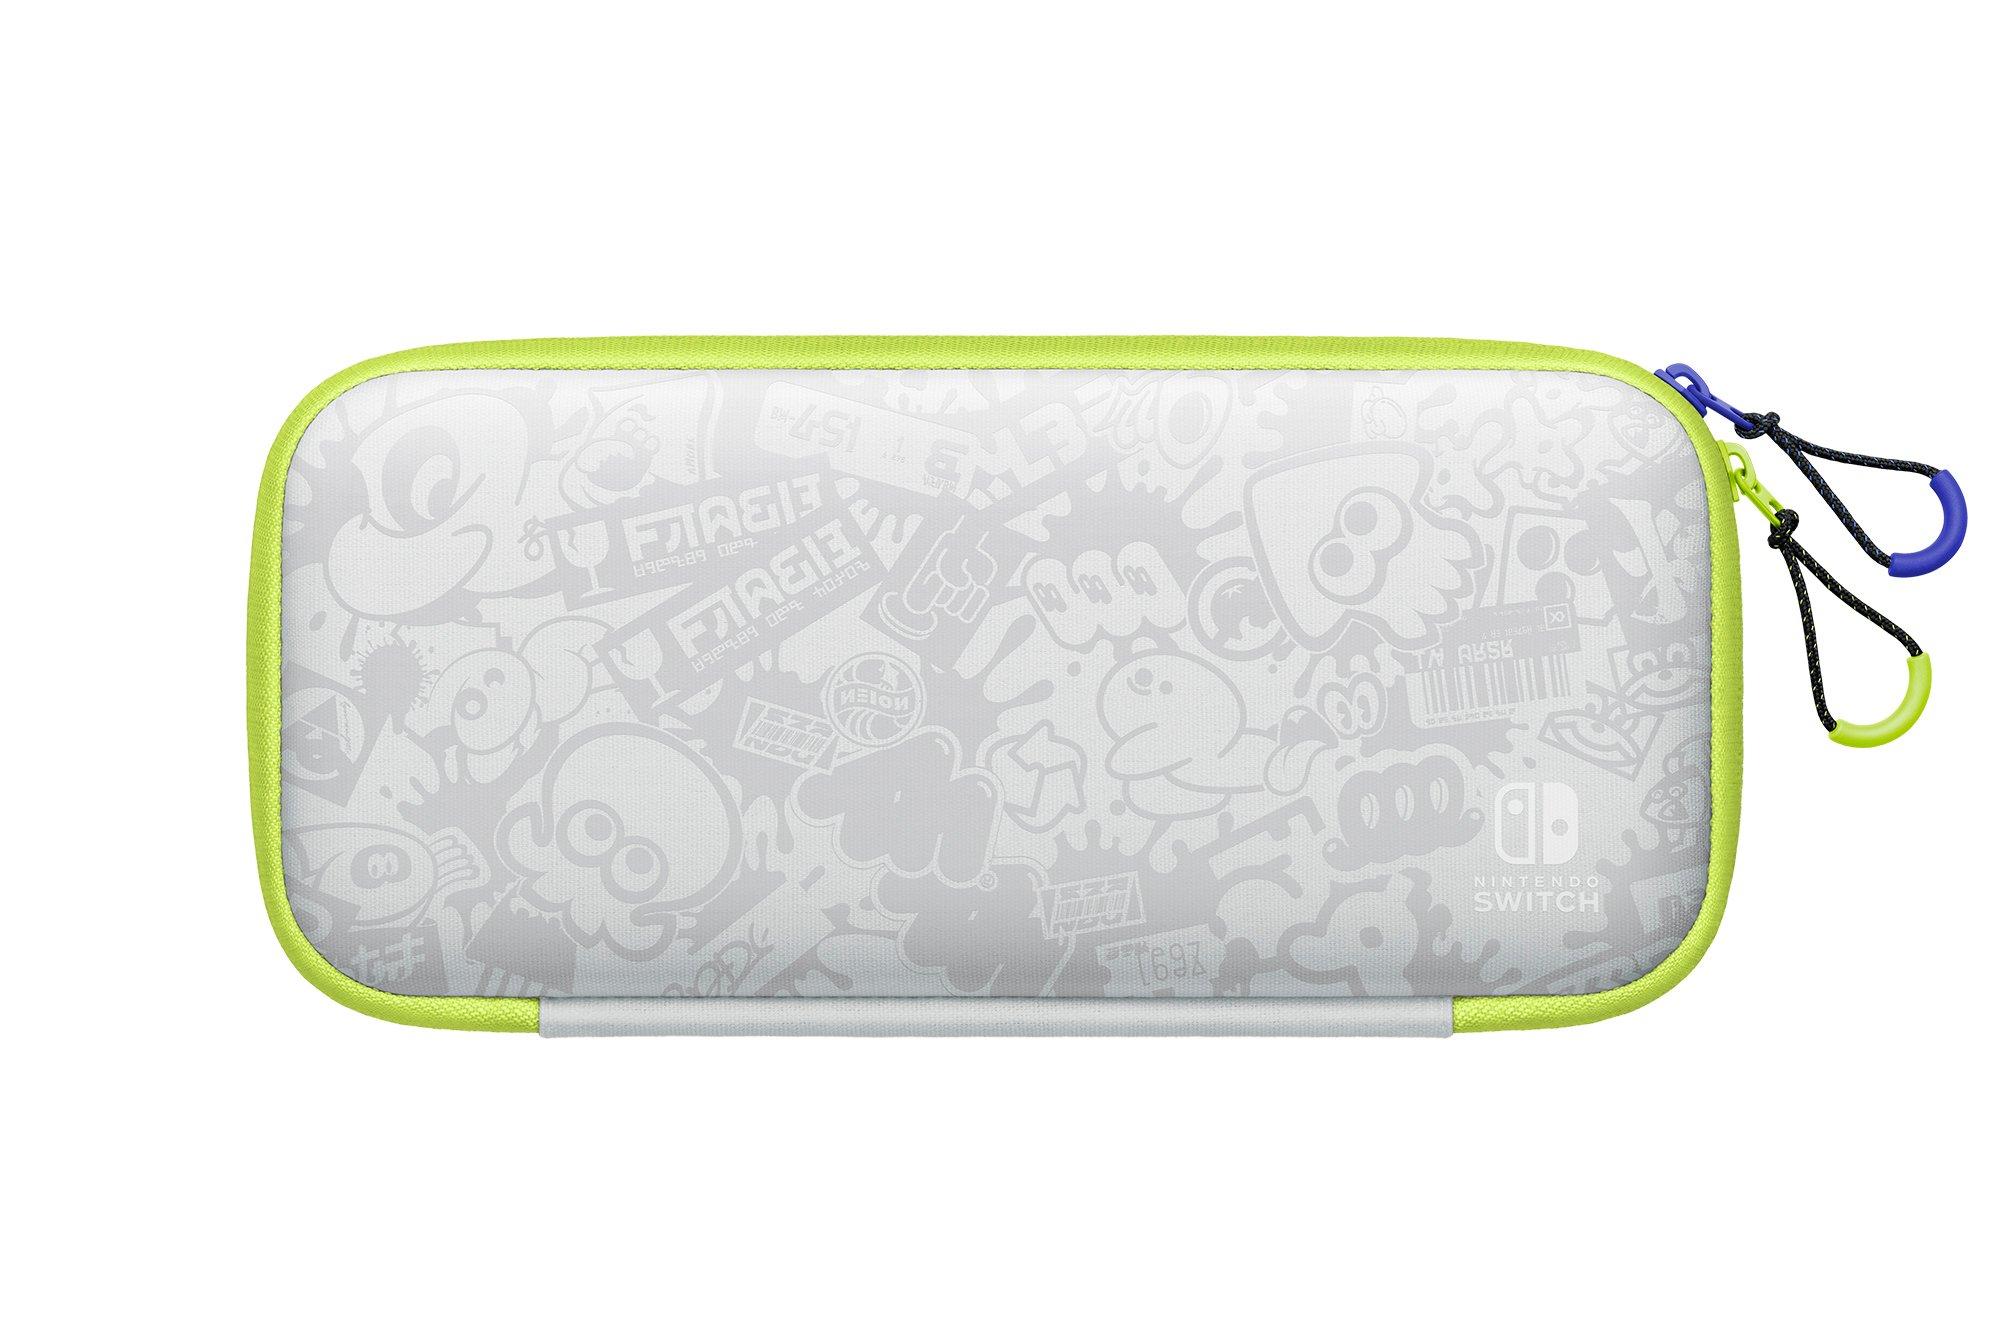 Switch Carrying Case & Screen Protector Splatoon 3 Edition | GameStop